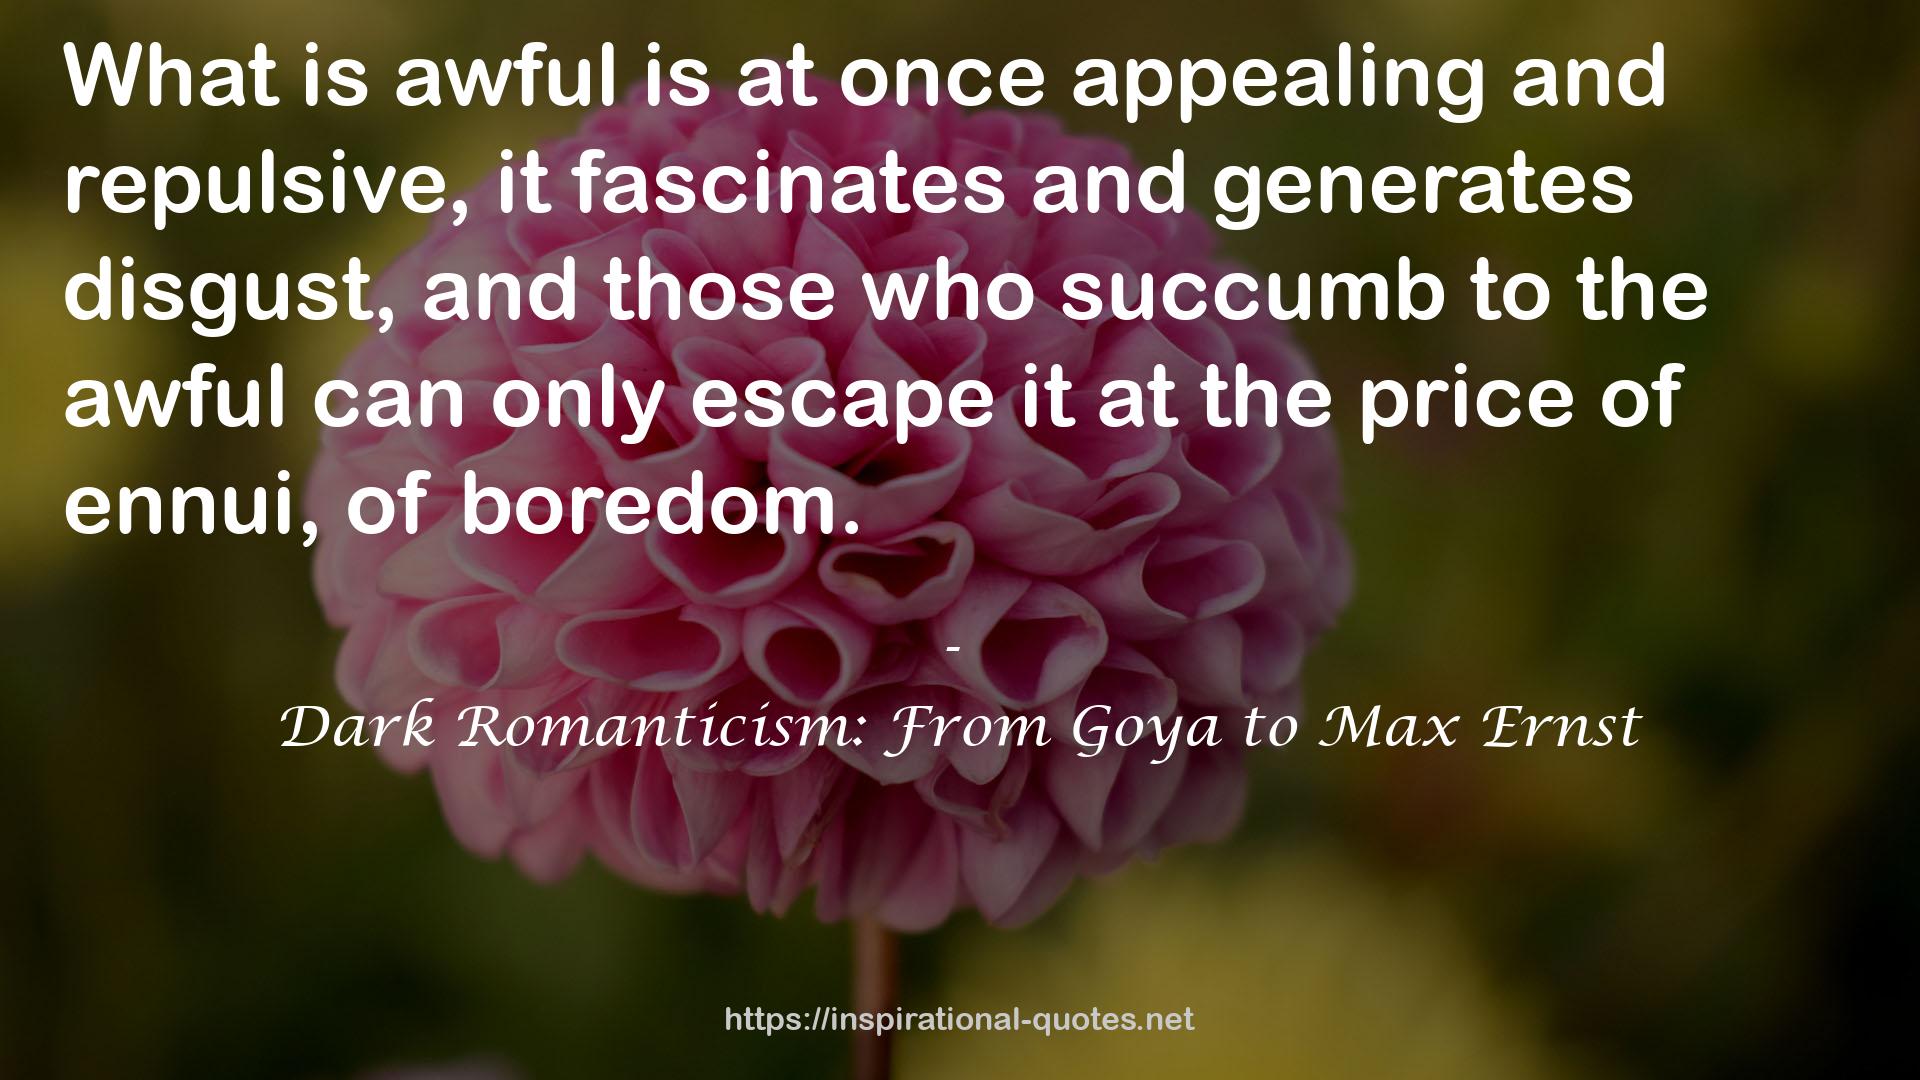 Dark Romanticism: From Goya to Max Ernst QUOTES